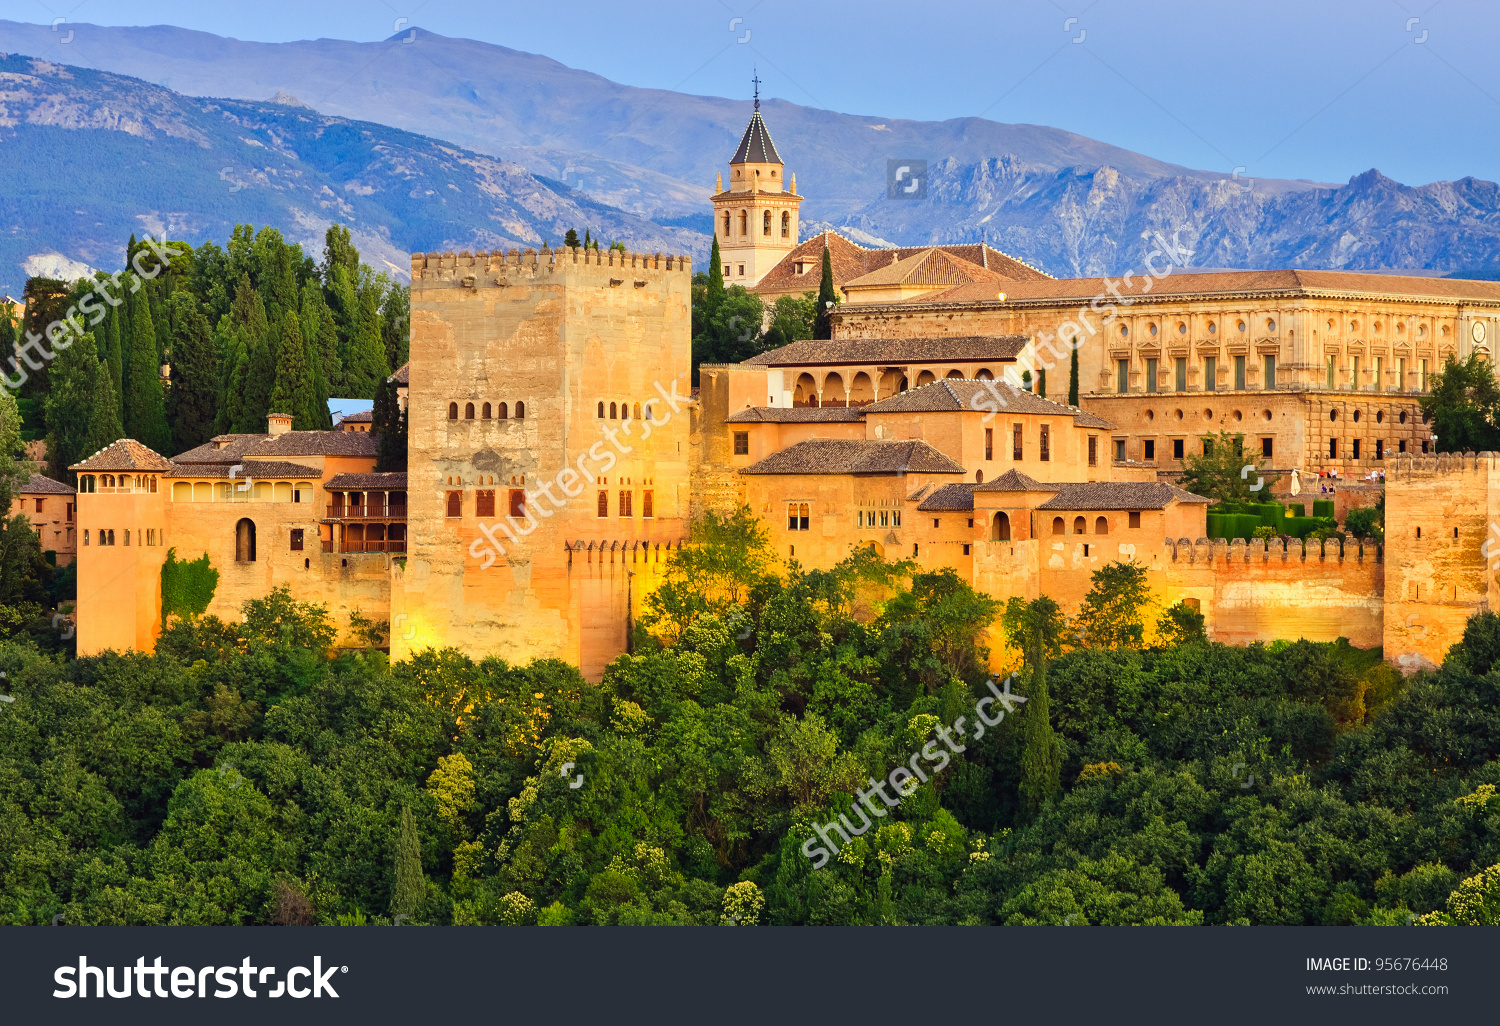 Nice Images Collection: Alhambra Desktop Wallpapers